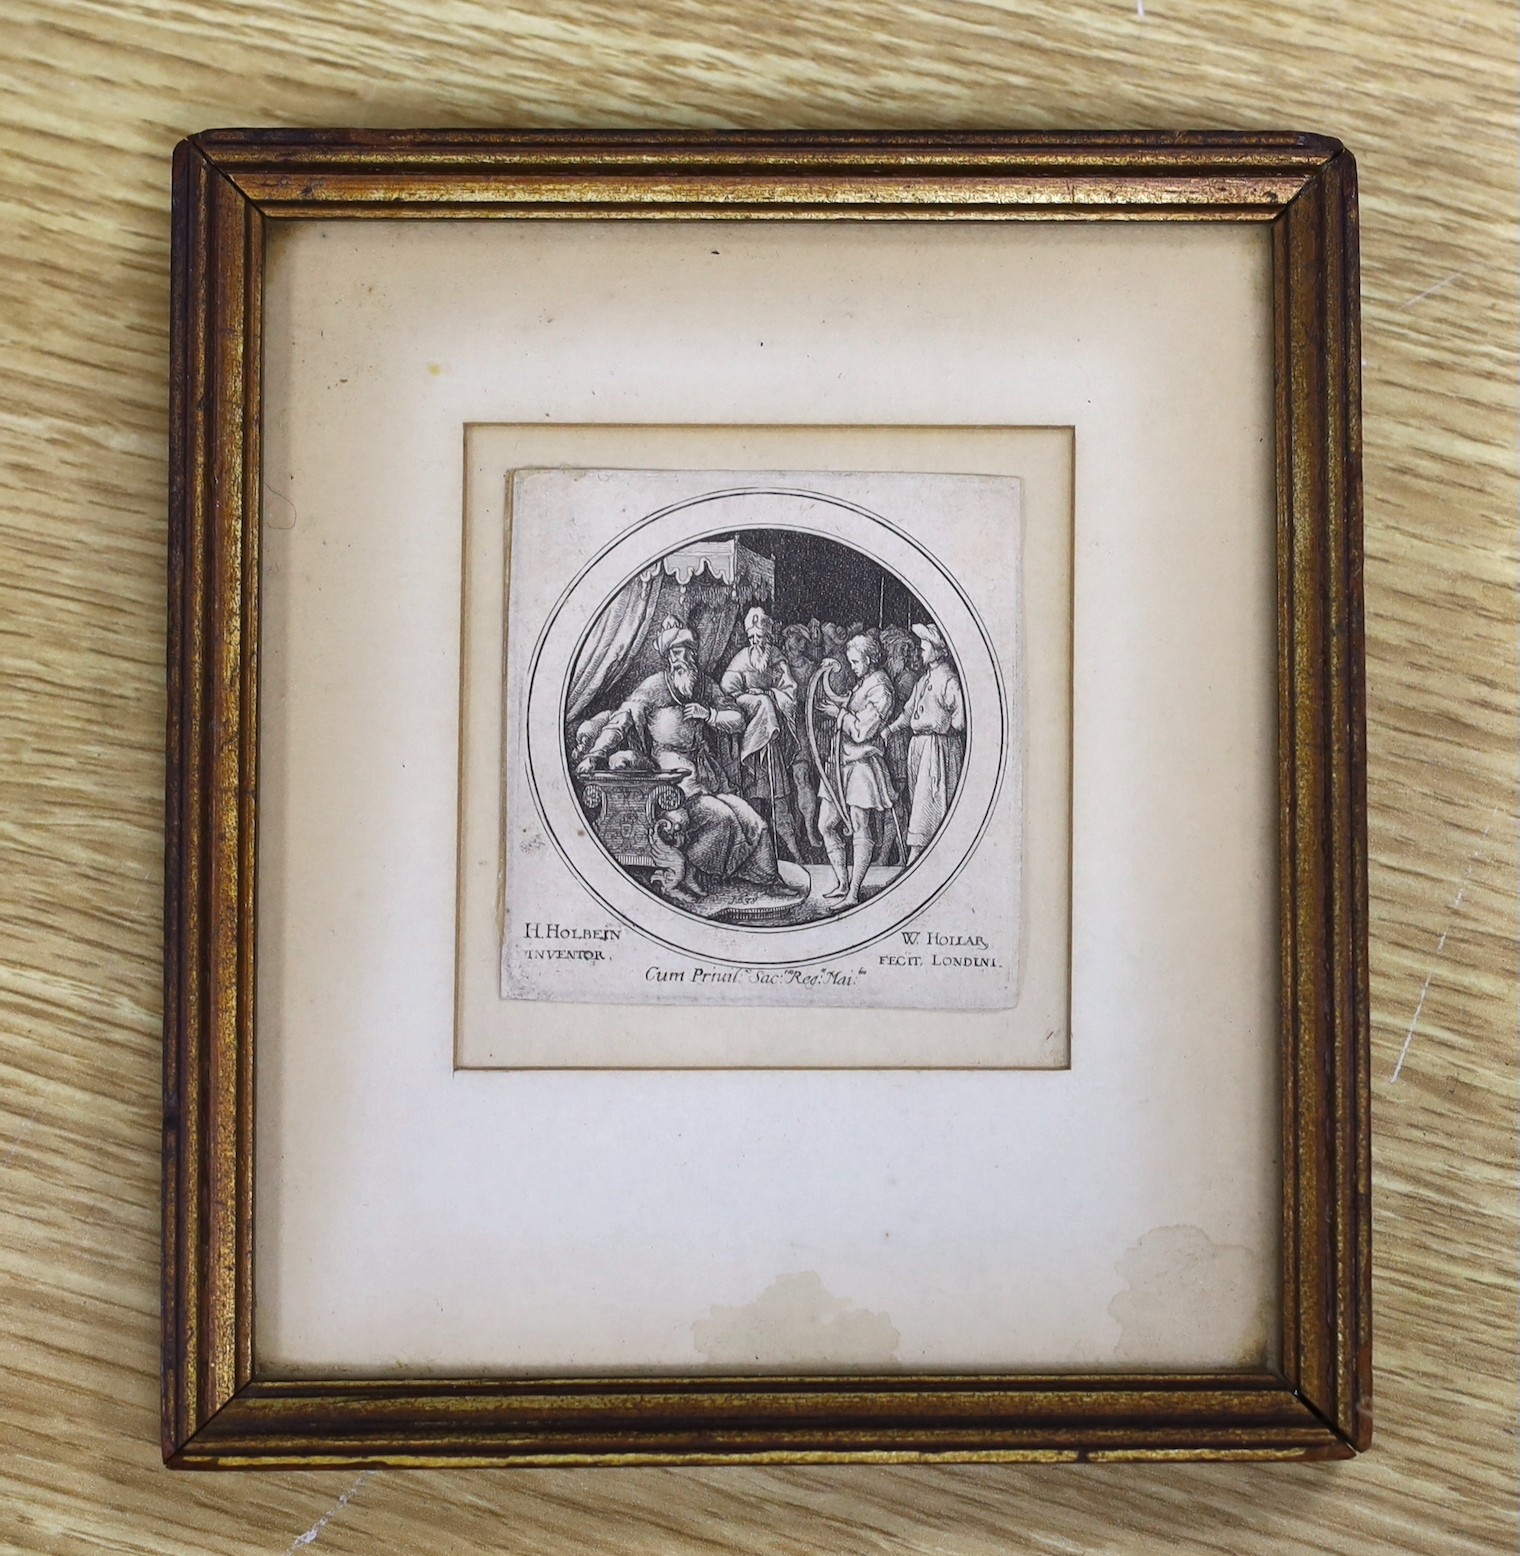 Wenceslaus Hollar after Hans Holbien the younger, drypoint etching second state c.1638, ’David before Saul’’, trimmed close to the margins, overall 6 x 6cm